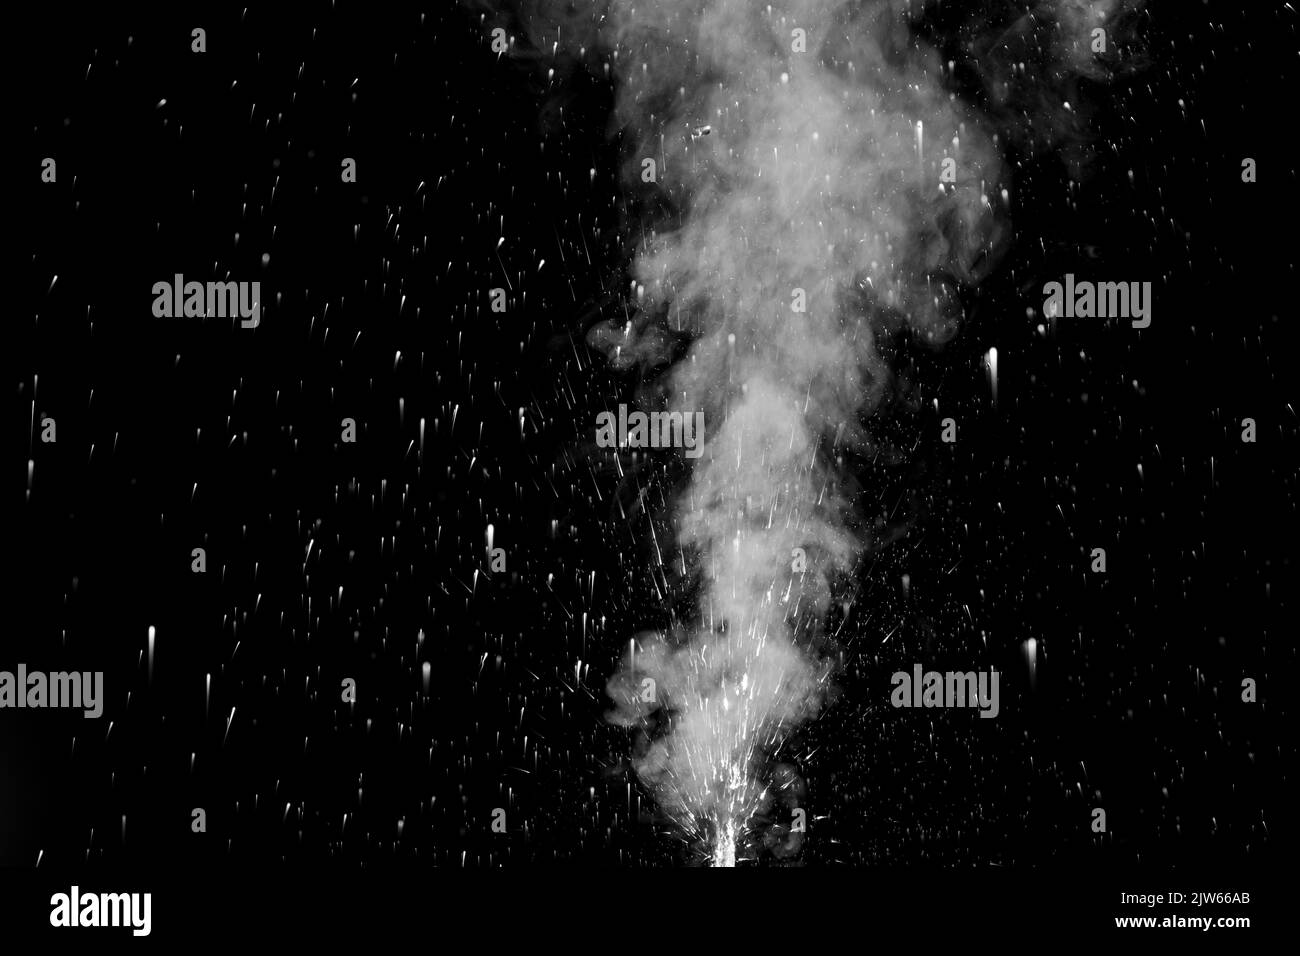 vapor steam rising over black background to overlay on your photos. Splashes and drops of water. Curly white steam rising up and splashing water scatt Stock Photo